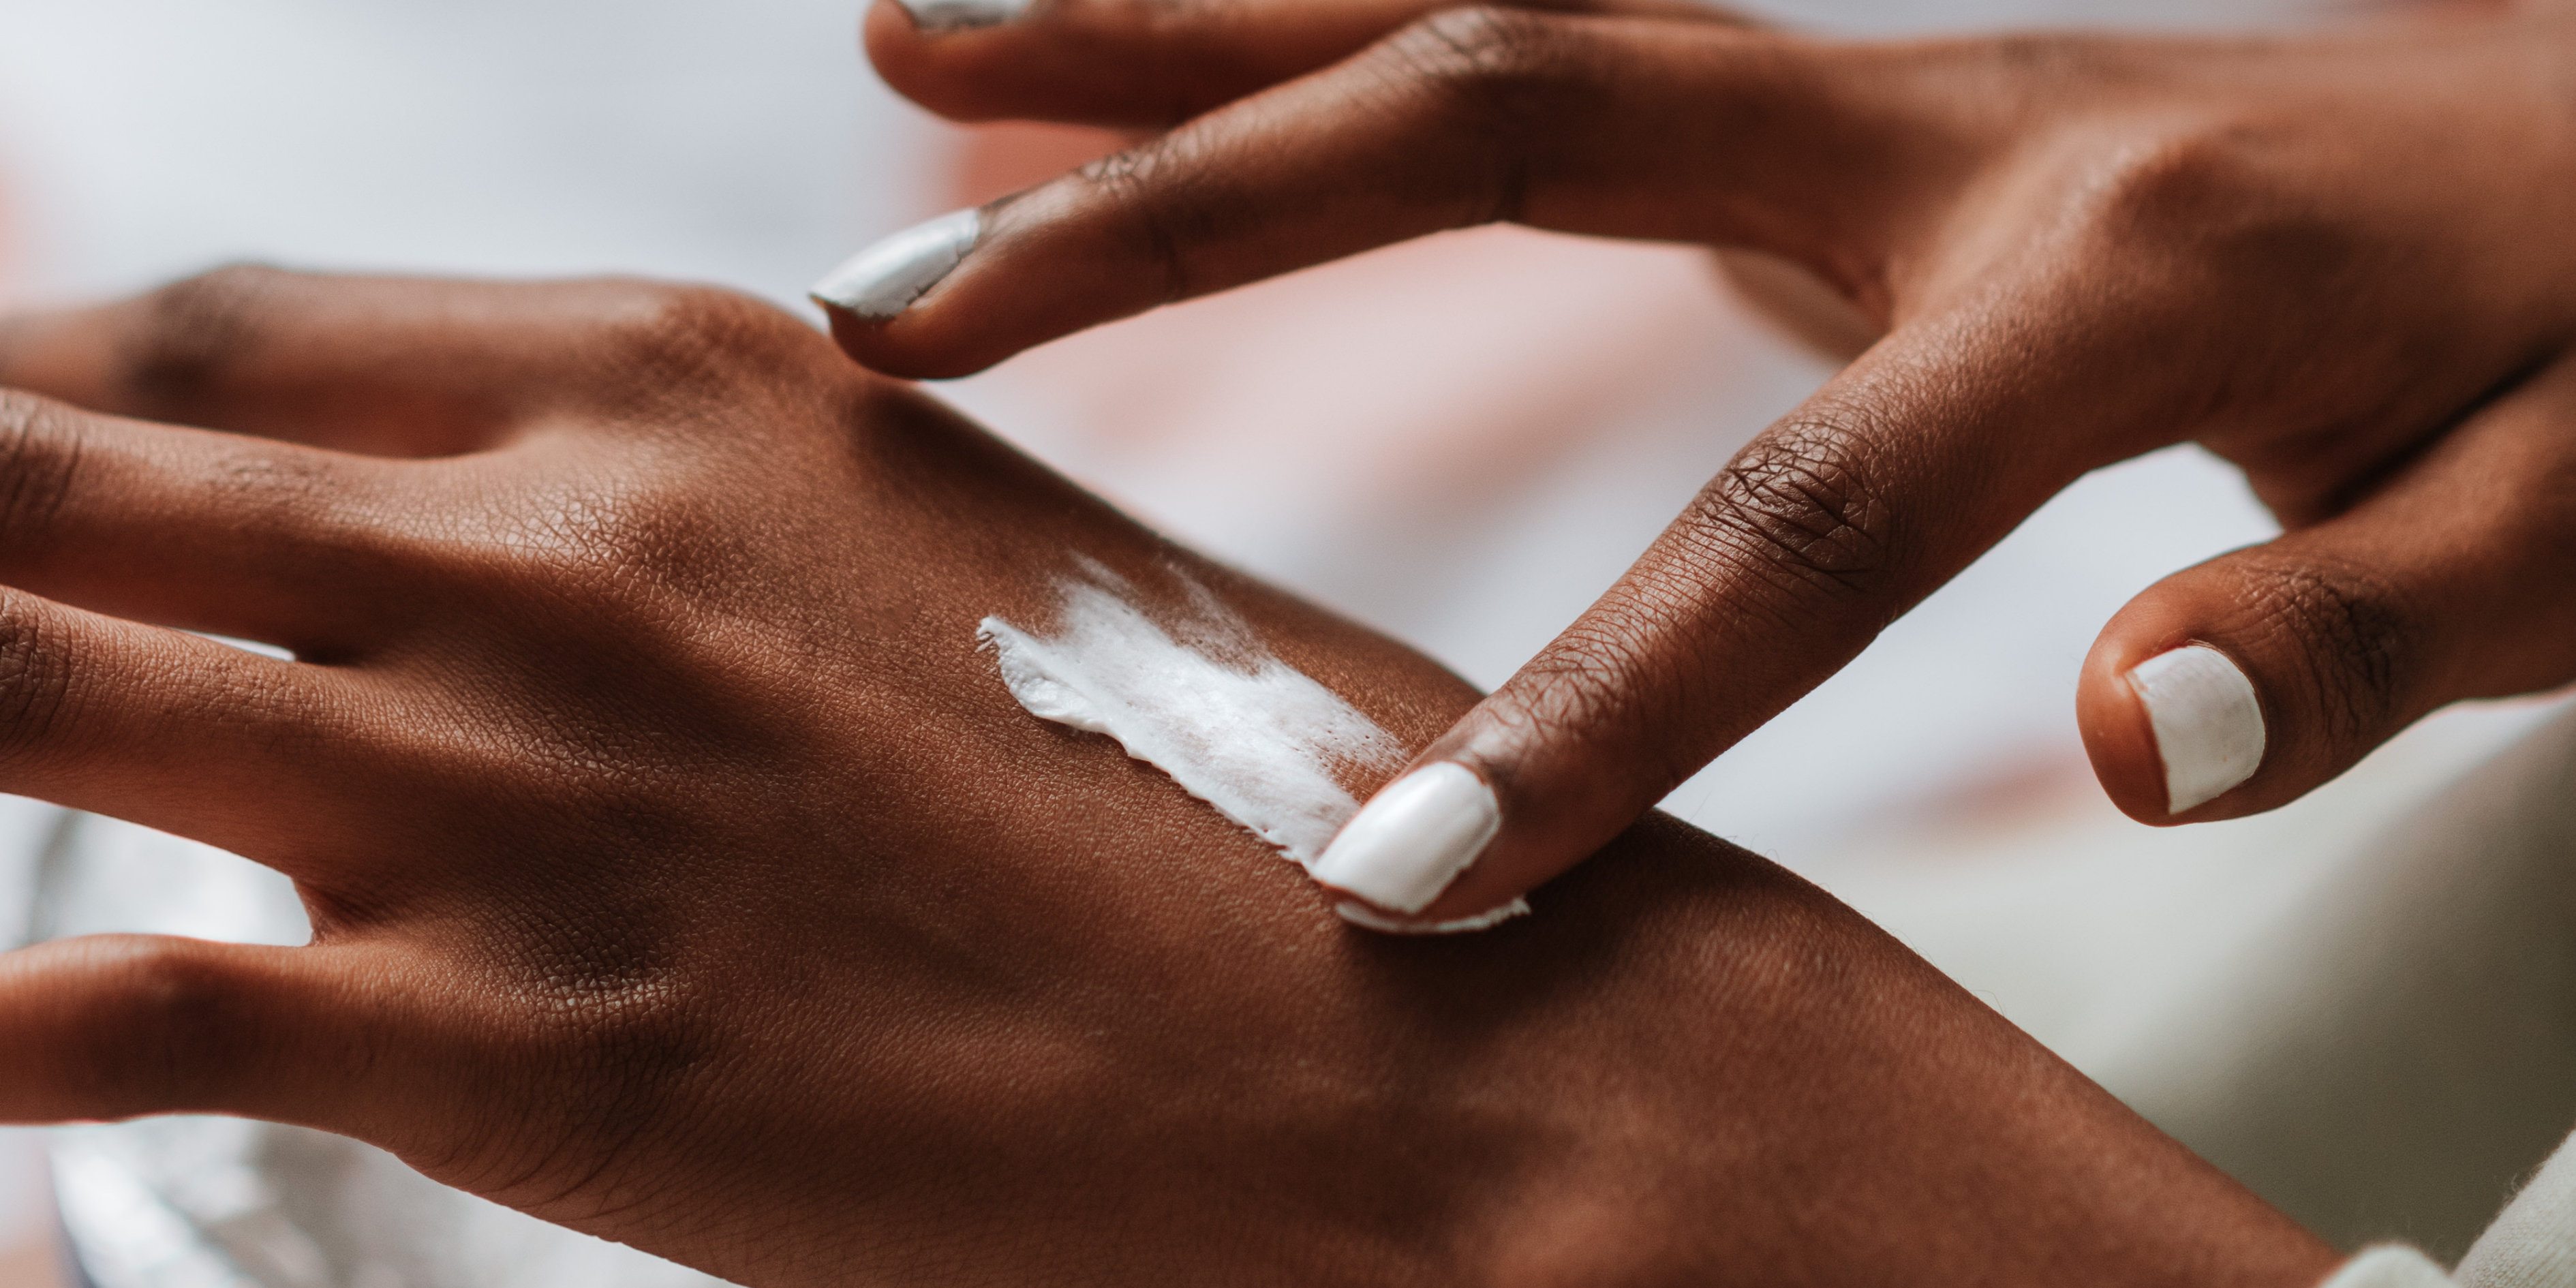 Moisturiser being applied to a hand to heal, soothe and strengthen sensitised skin 